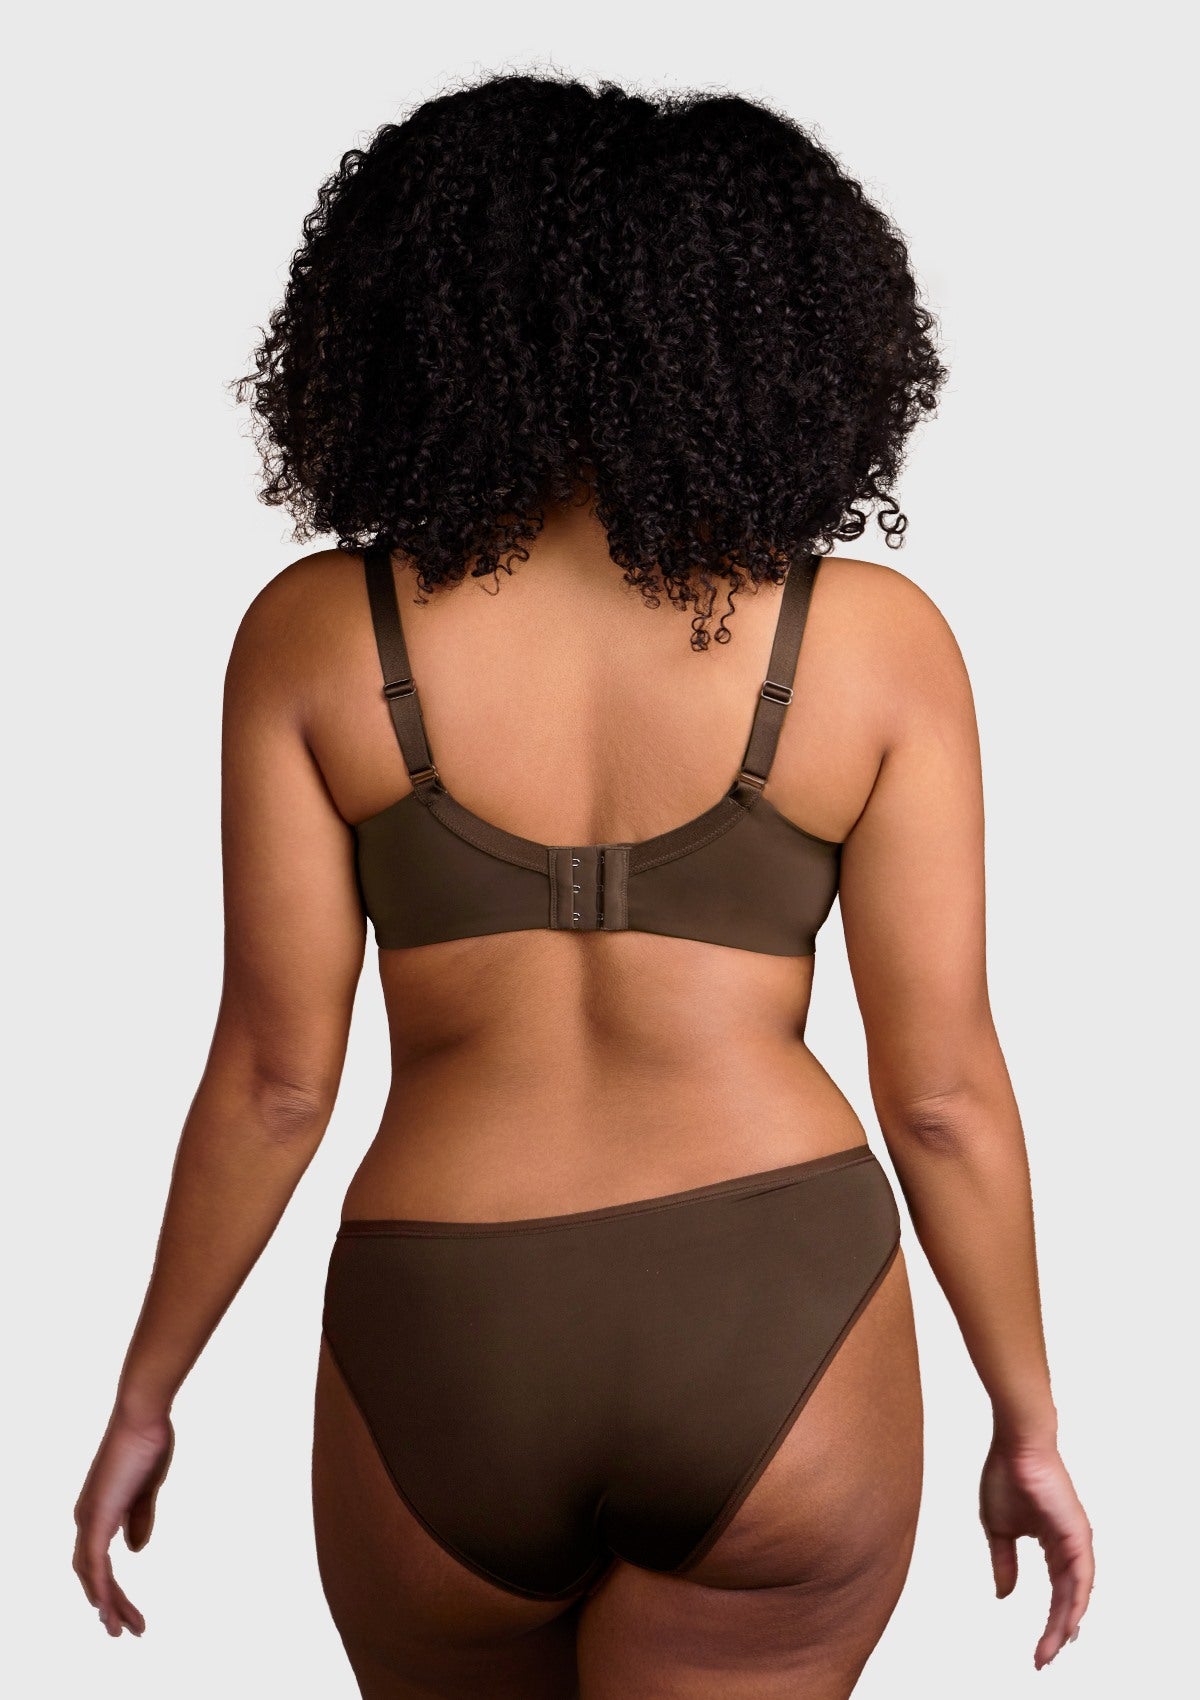 HSIA Gemma Smooth Supportive Padded T-shirt Bra - For Full Figures - Cocoa Brown / 34 / DDD/F